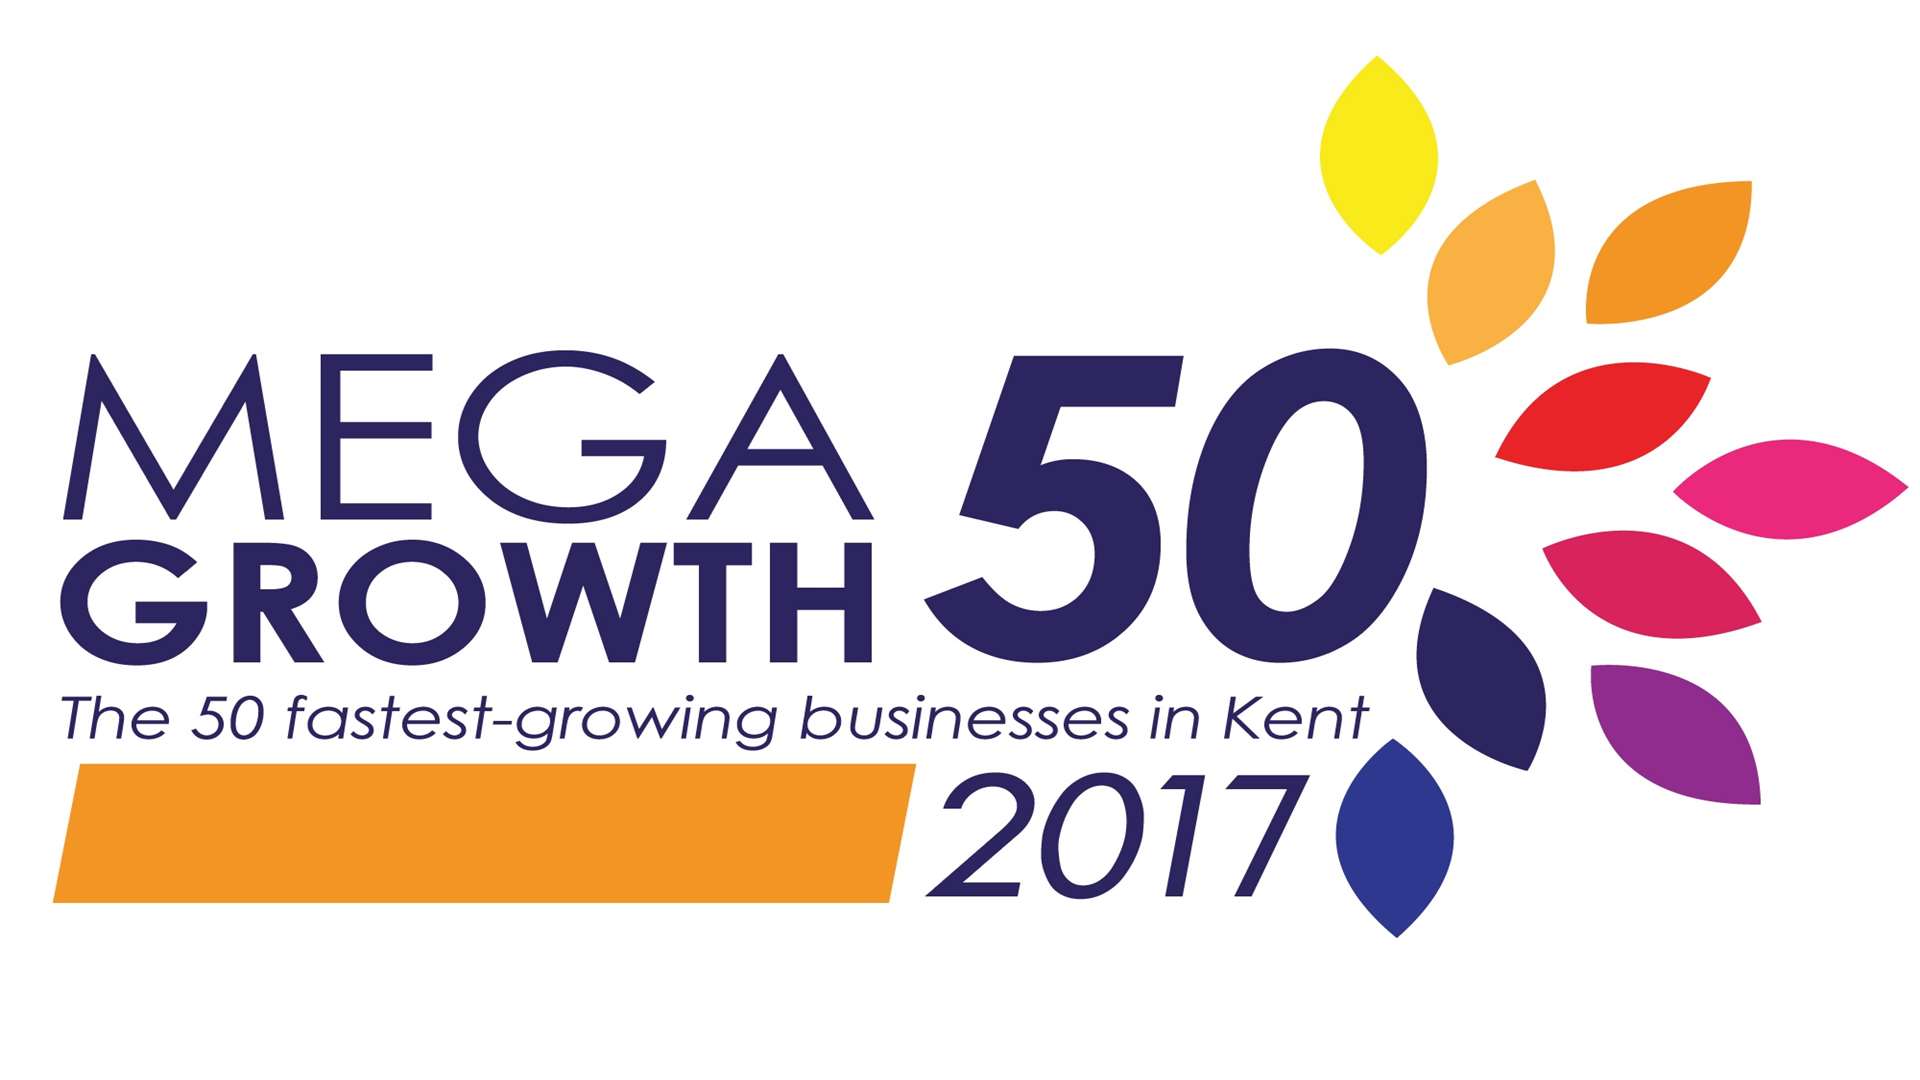 Companies can submit their accounts to be considered for the MegaGrowth 50 list